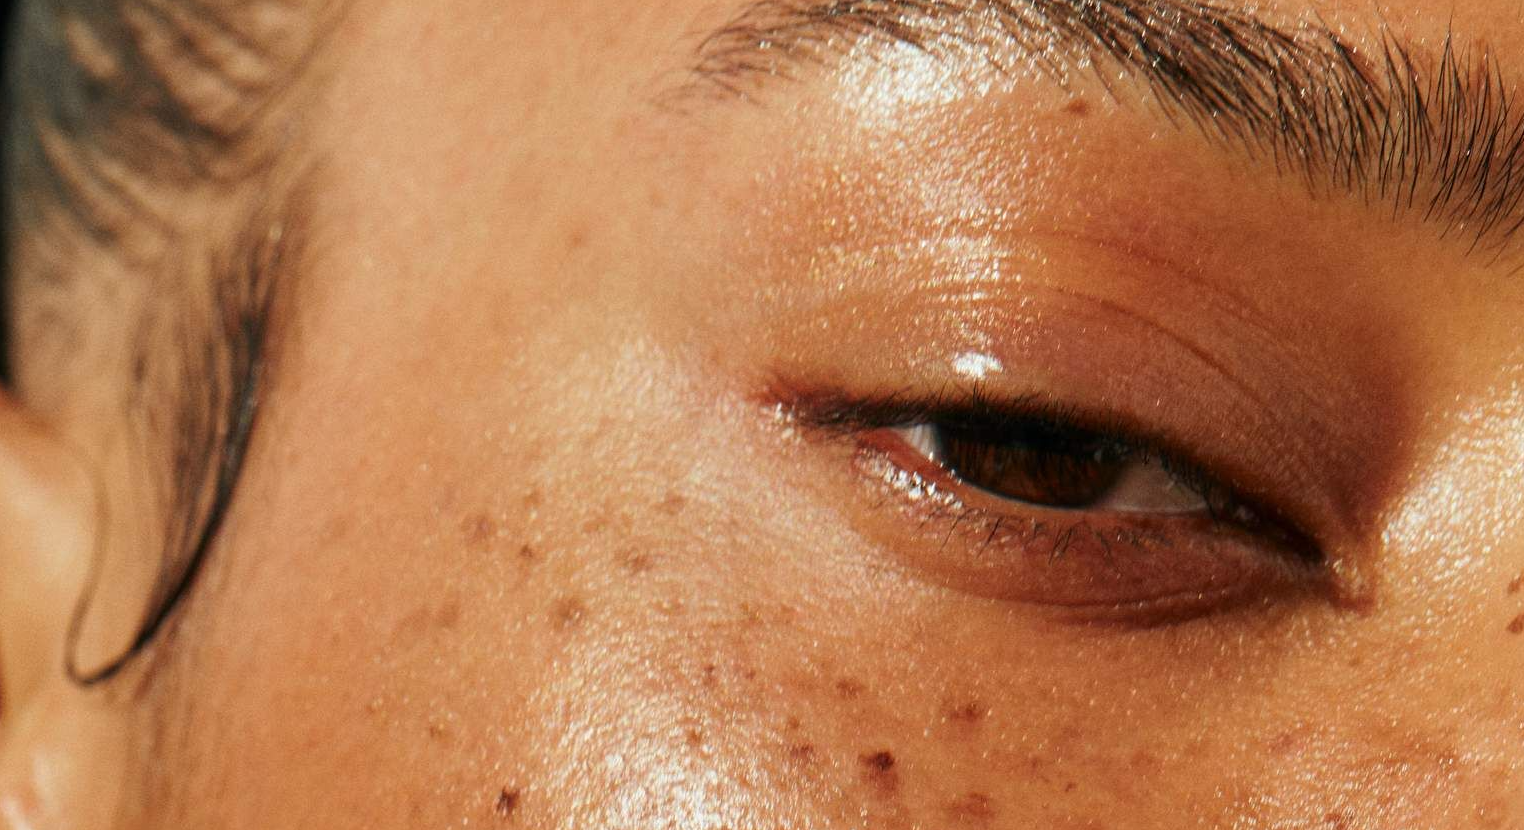 WHAT YOU SHOULD KNOW ABOUT HYPERPIGMENTATION